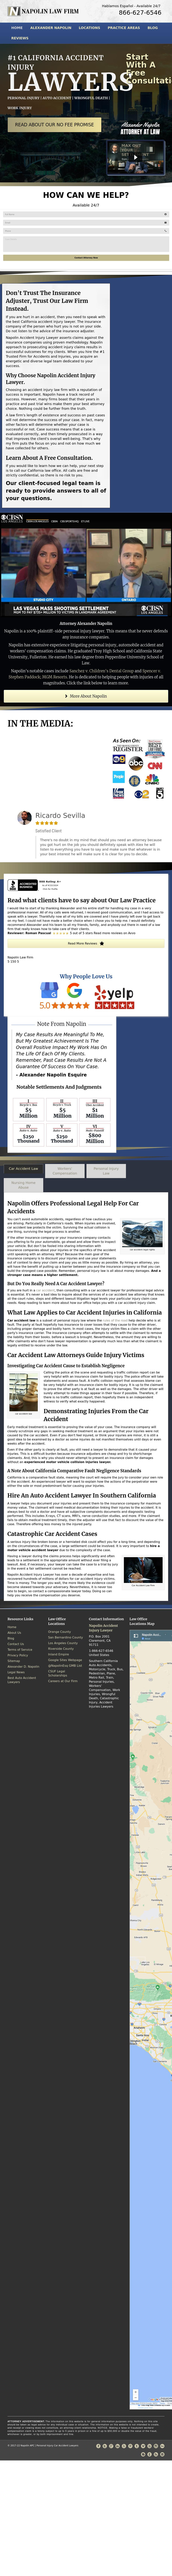 Napolin Law Firm - Claremont CA Lawyers